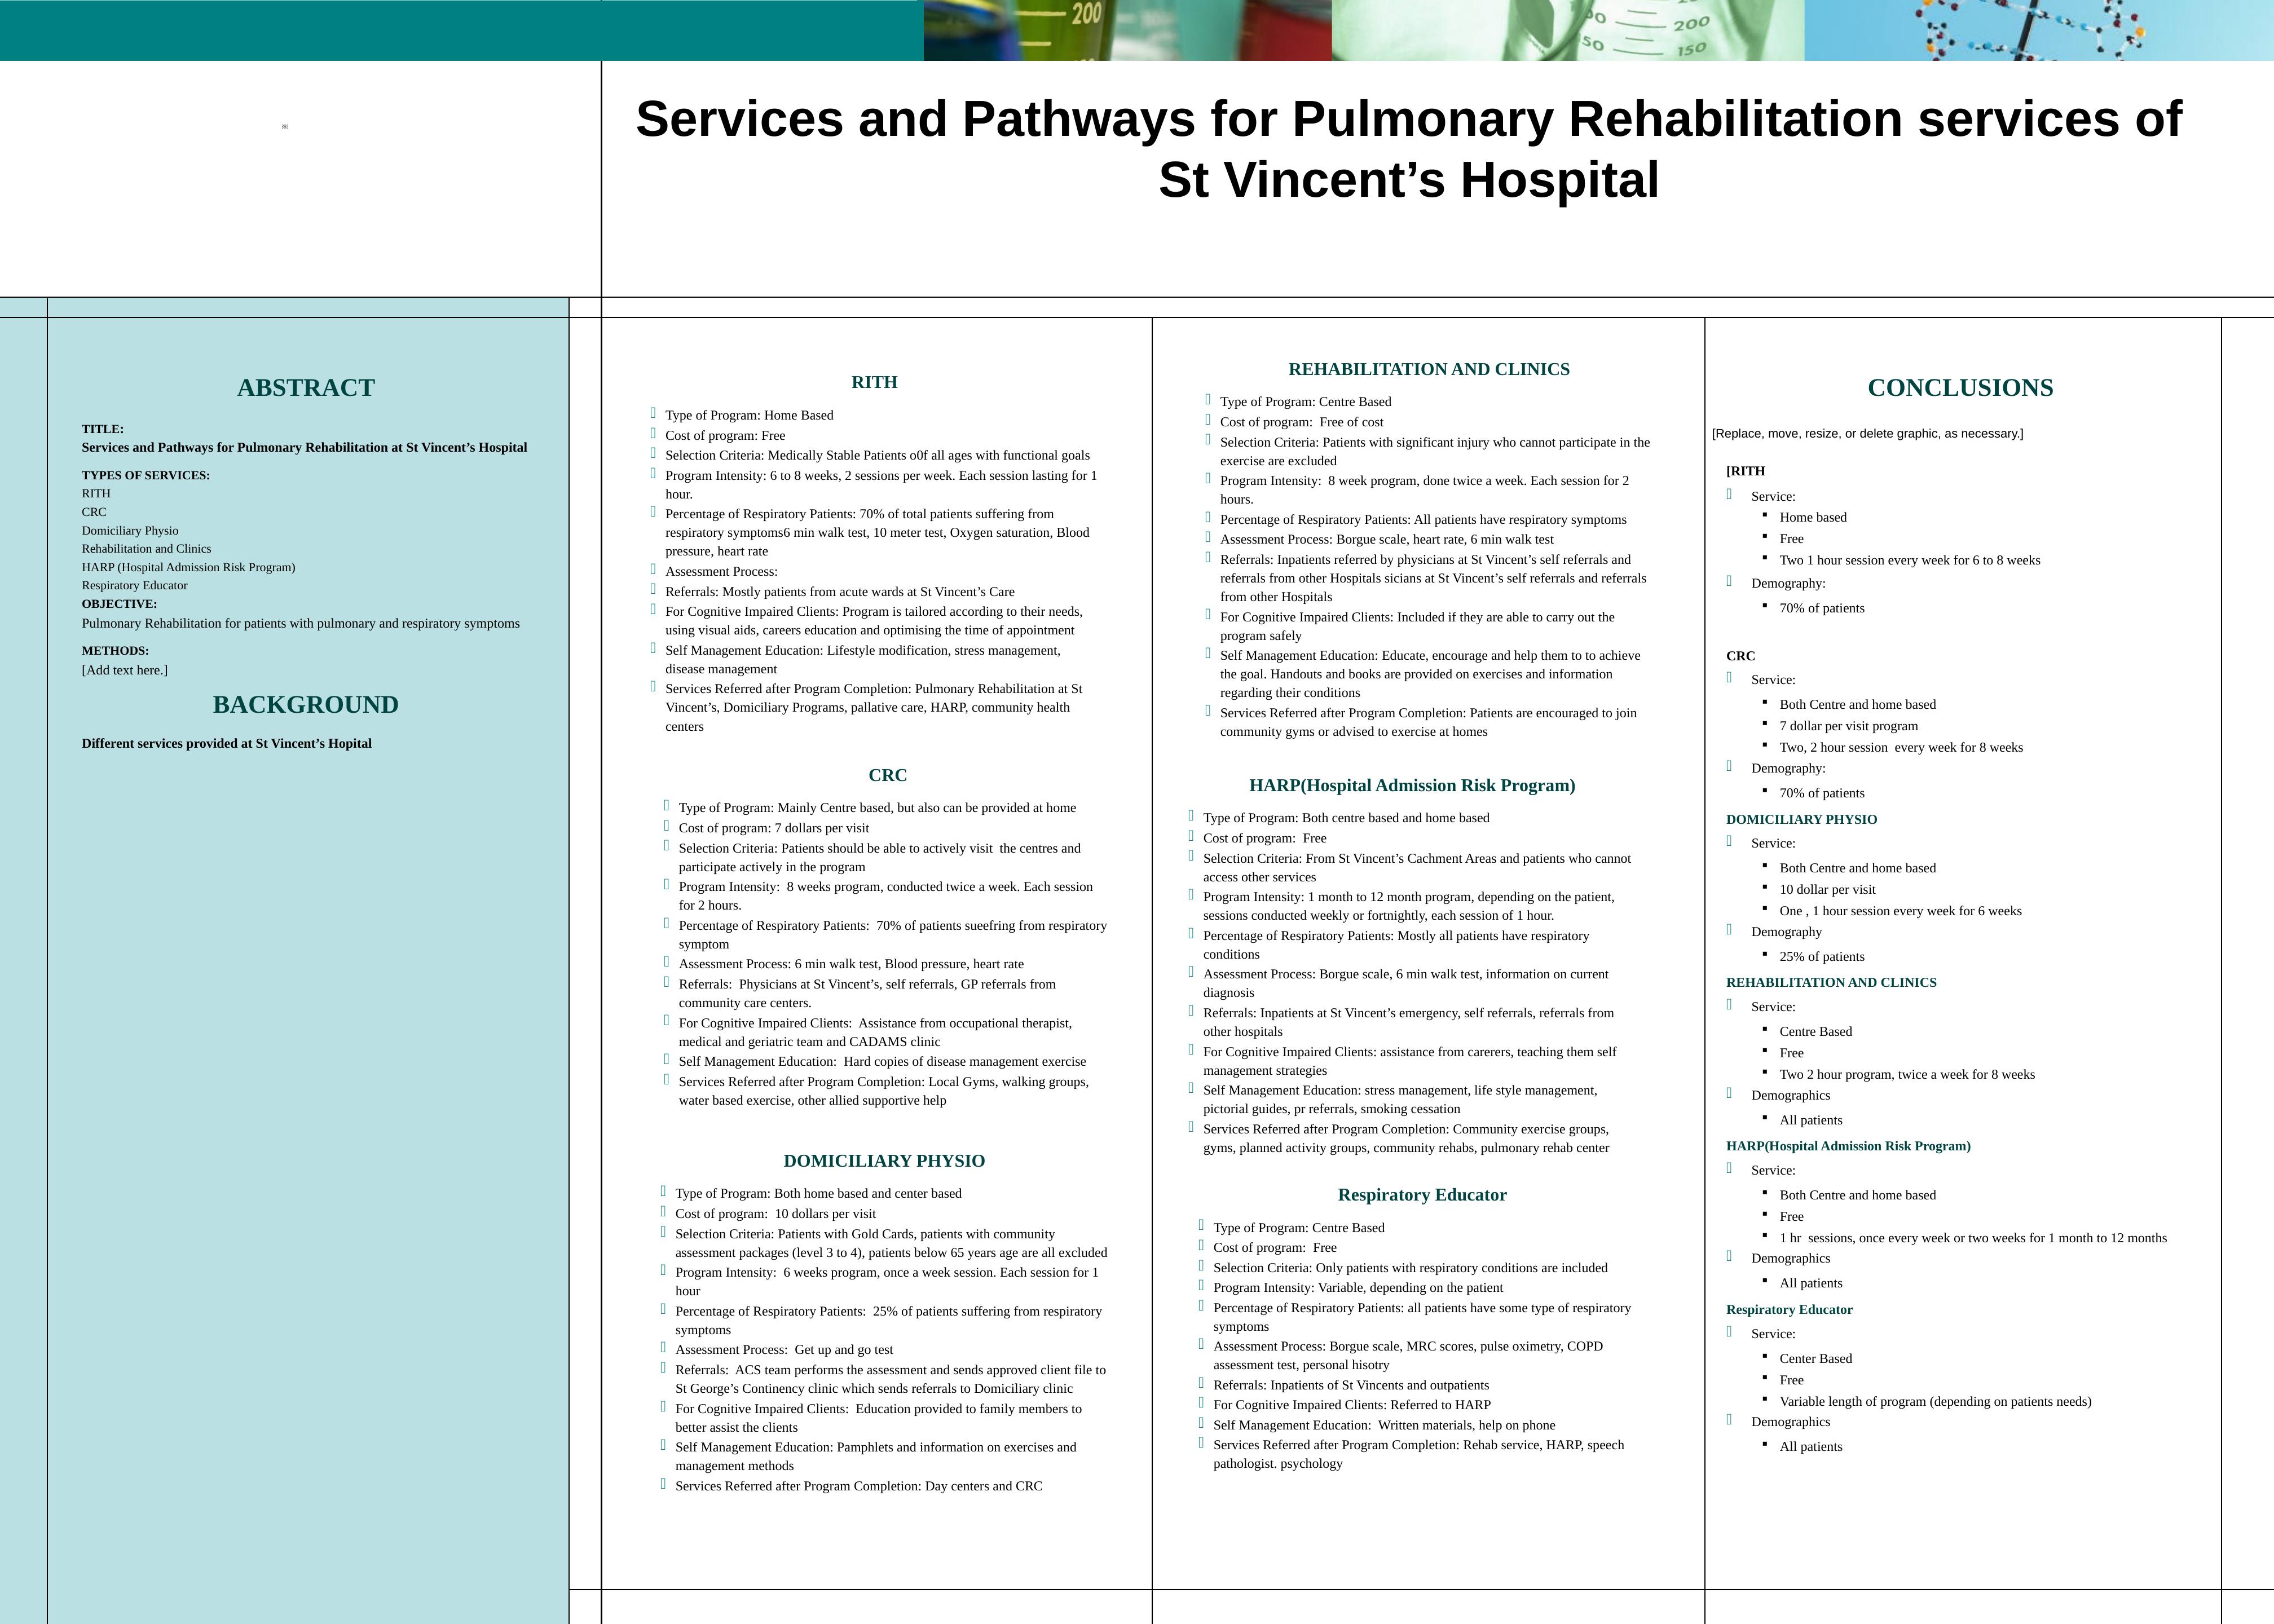 Services and Pathways for Pulmonary Rehabilitation Services_1